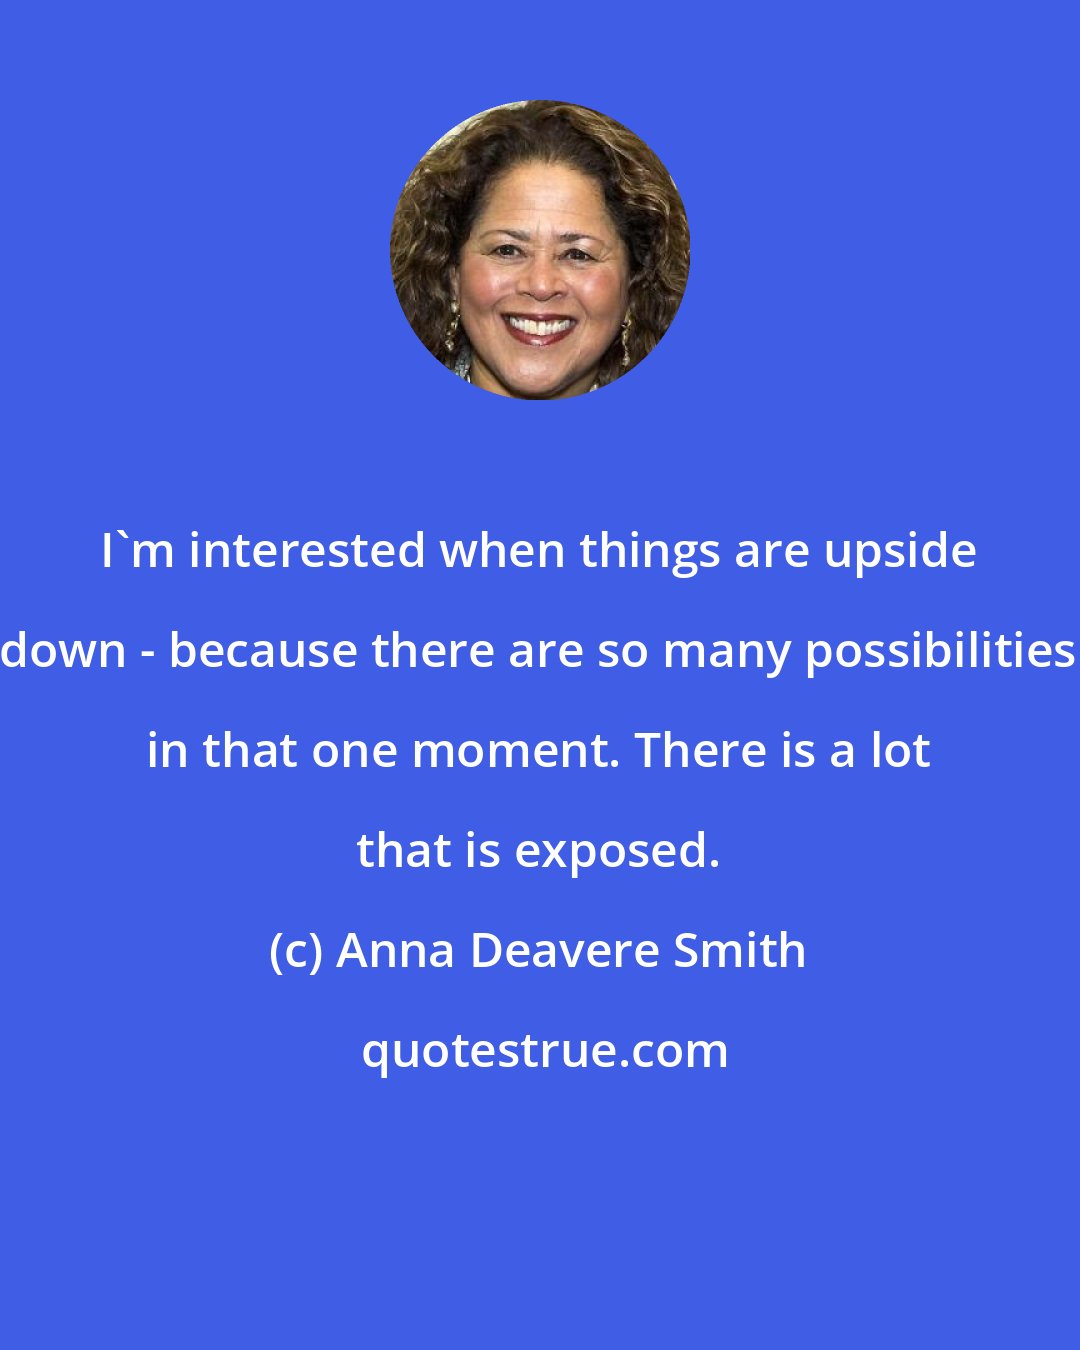 Anna Deavere Smith: I'm interested when things are upside down - because there are so many possibilities in that one moment. There is a lot that is exposed.